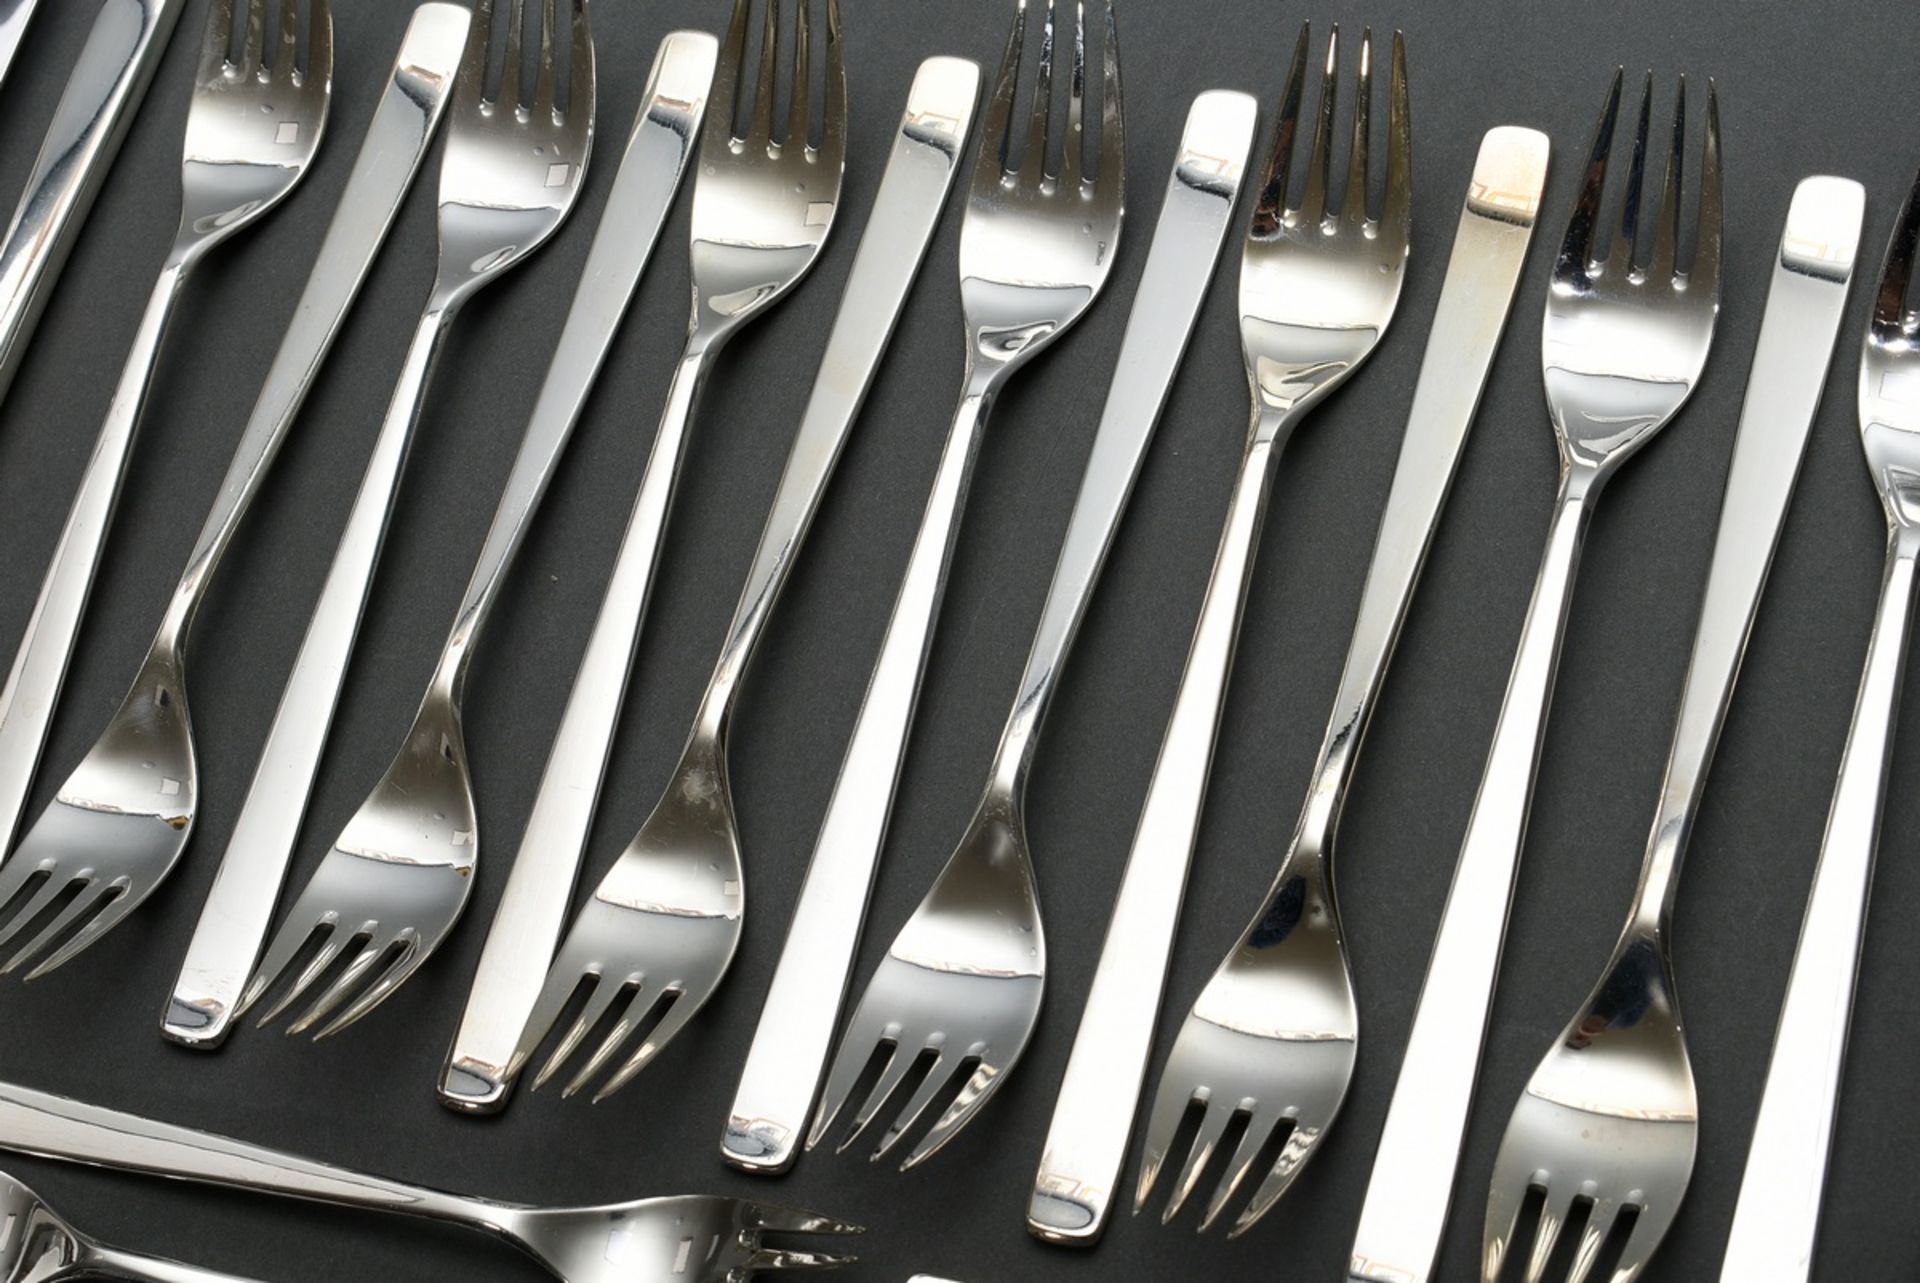 83 pieces Wilkens cutlery ‘Modern’, silver 800, 2361g (without knives), consisting of: 13 table kni - Image 4 of 7